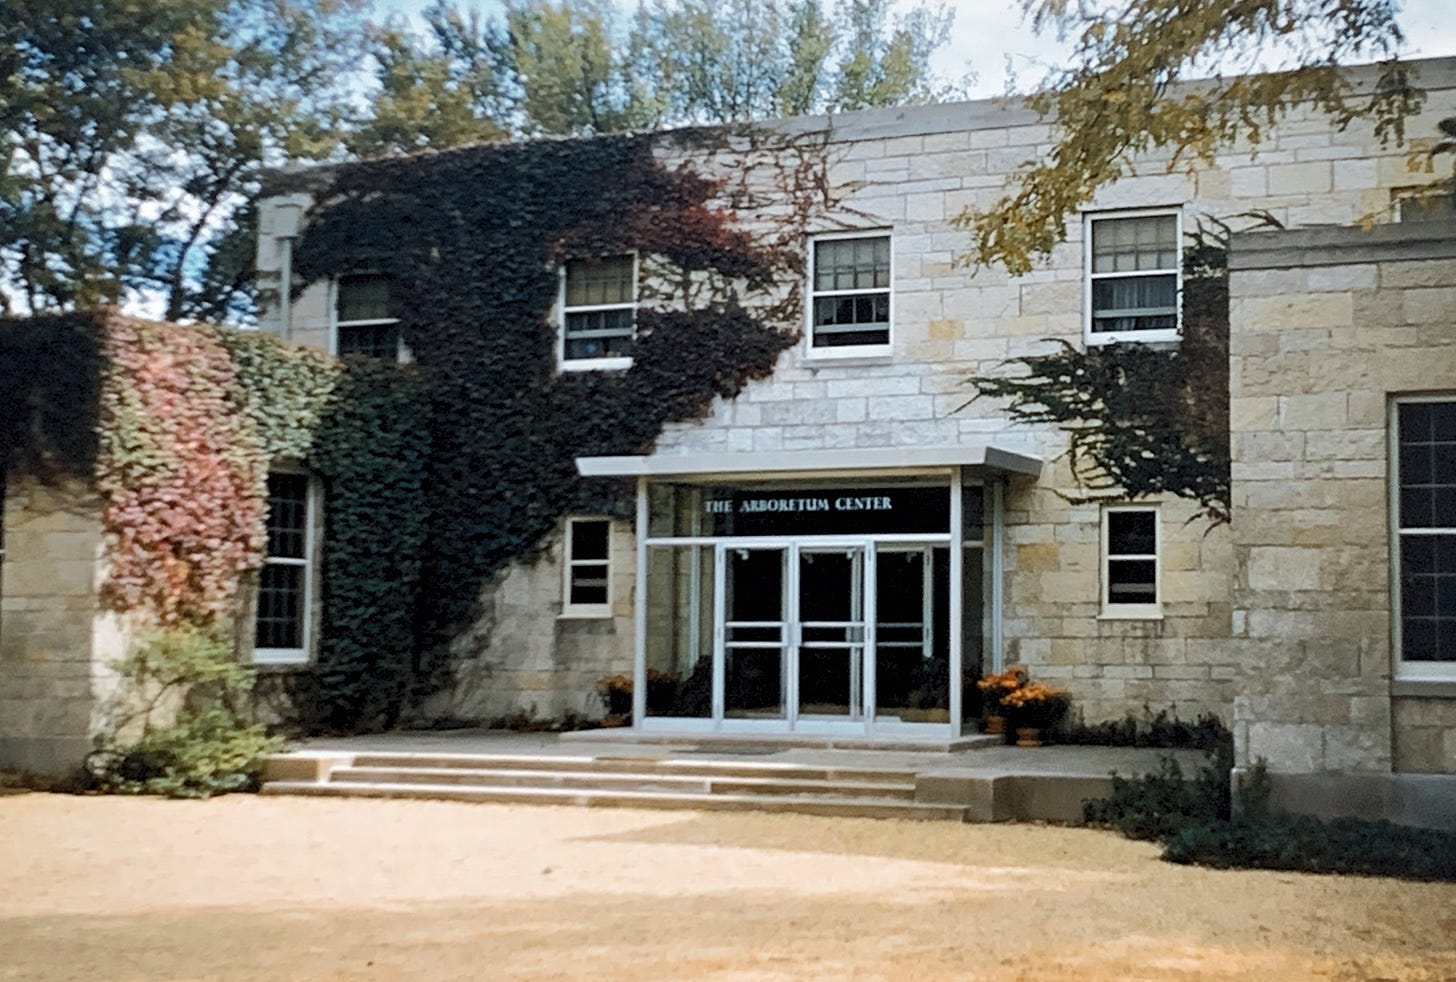 Exterior of the Arboretum Center, a stone building covered partially with ivy.